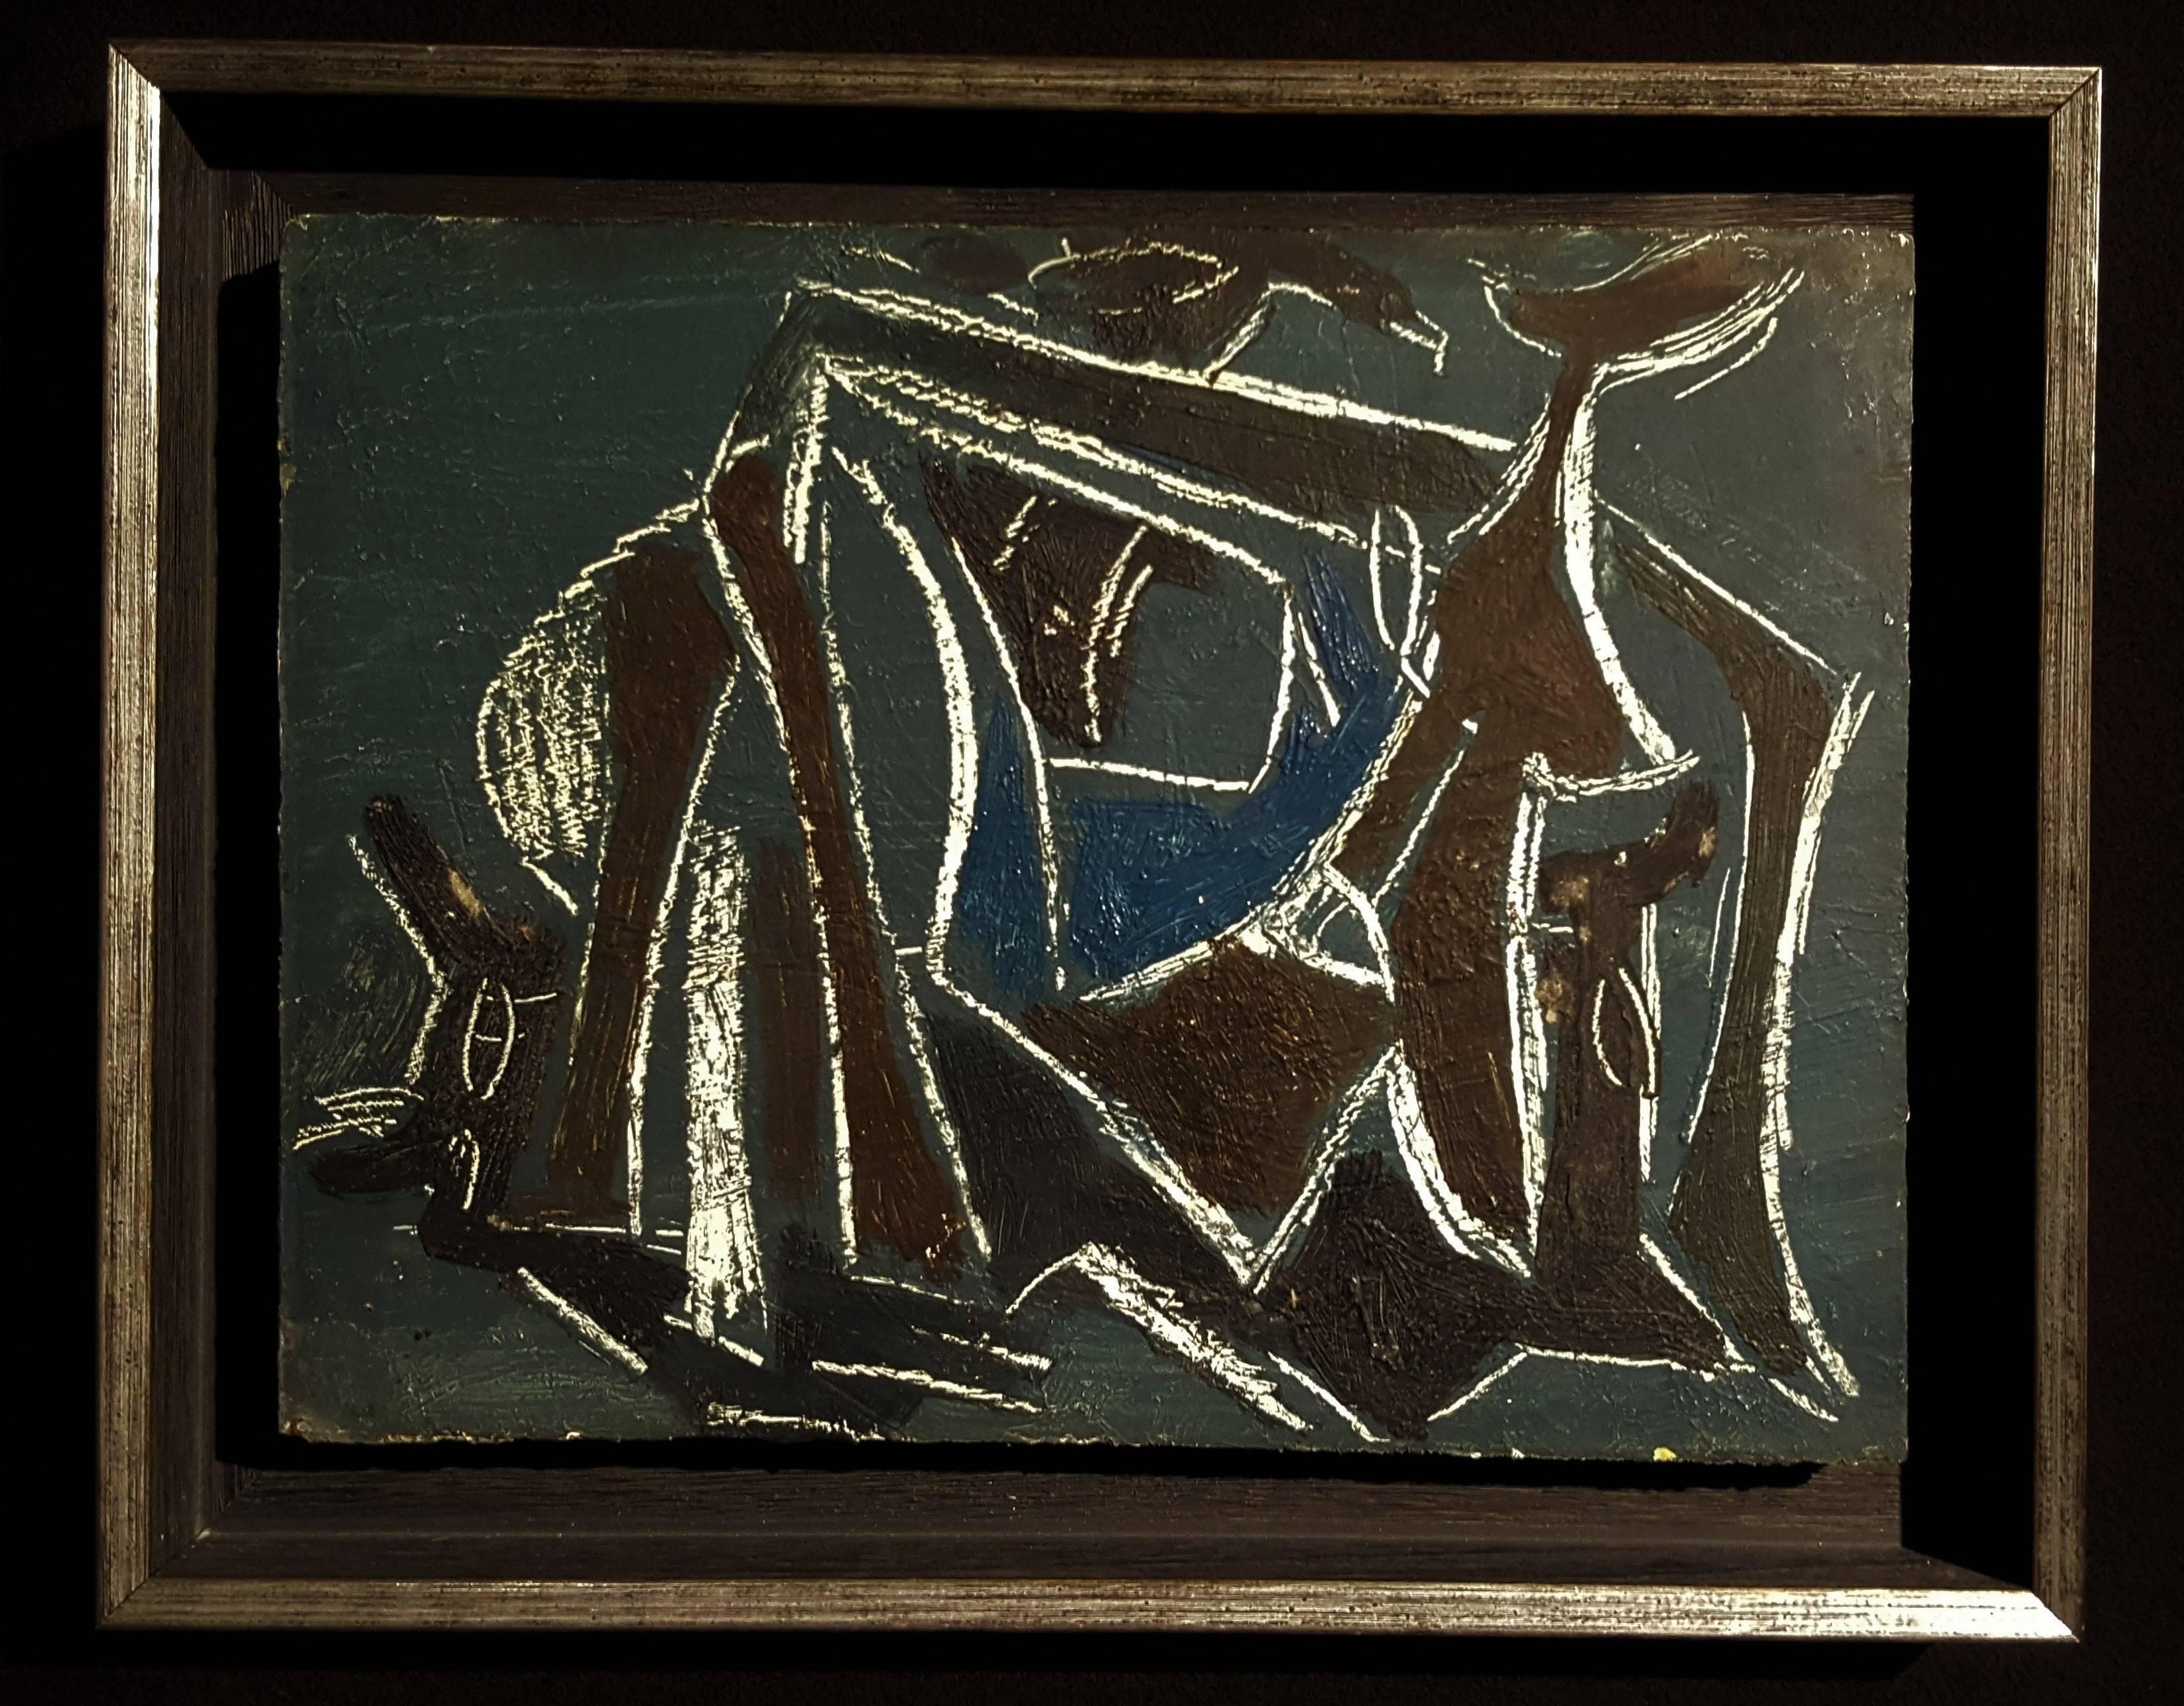 Le repos par Jan Darna (1901-1974)
Oil on panel 
Unsigned
Provenance: workshop sale
Dimensions without frame: 20 cm x 26.5 cm 
Dimensions with frame: 25.5 x 32 x 4 cm

From cubism to abstraction with Jan Darna (1901-1974)

These oils and